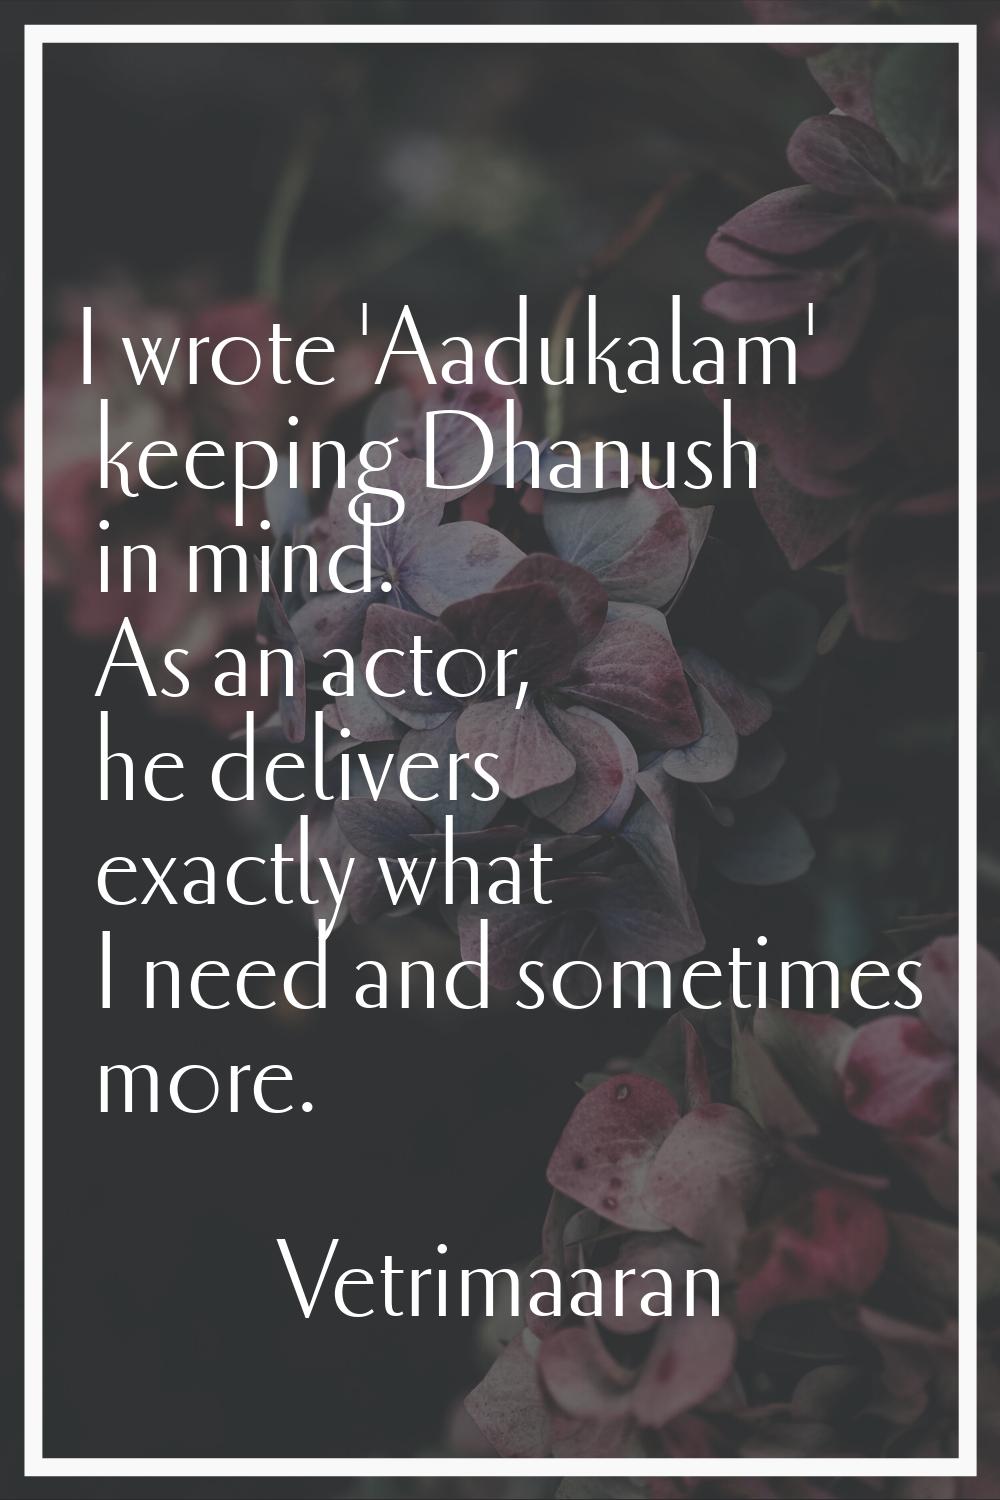 I wrote 'Aadukalam' keeping Dhanush in mind. As an actor, he delivers exactly what I need and somet